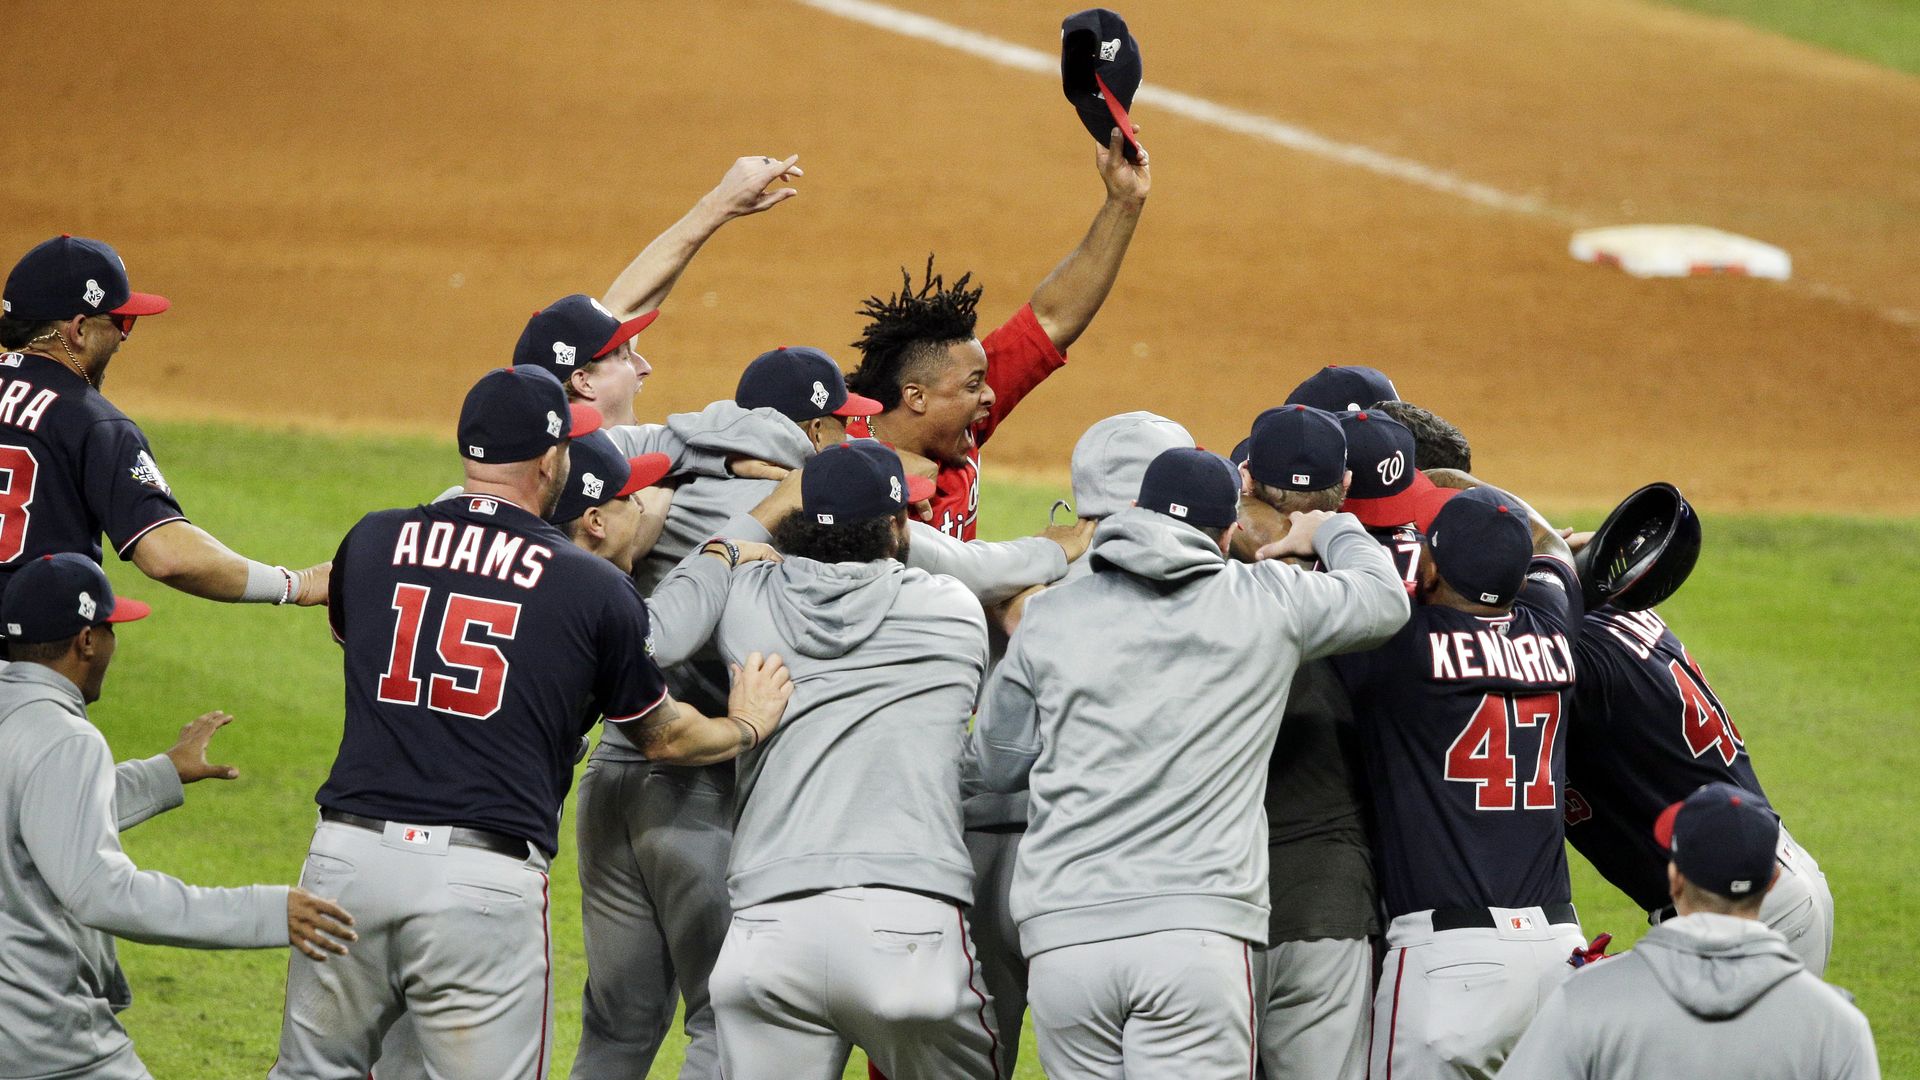 How the Nationals beat the Astros to win the 2019 World Series.